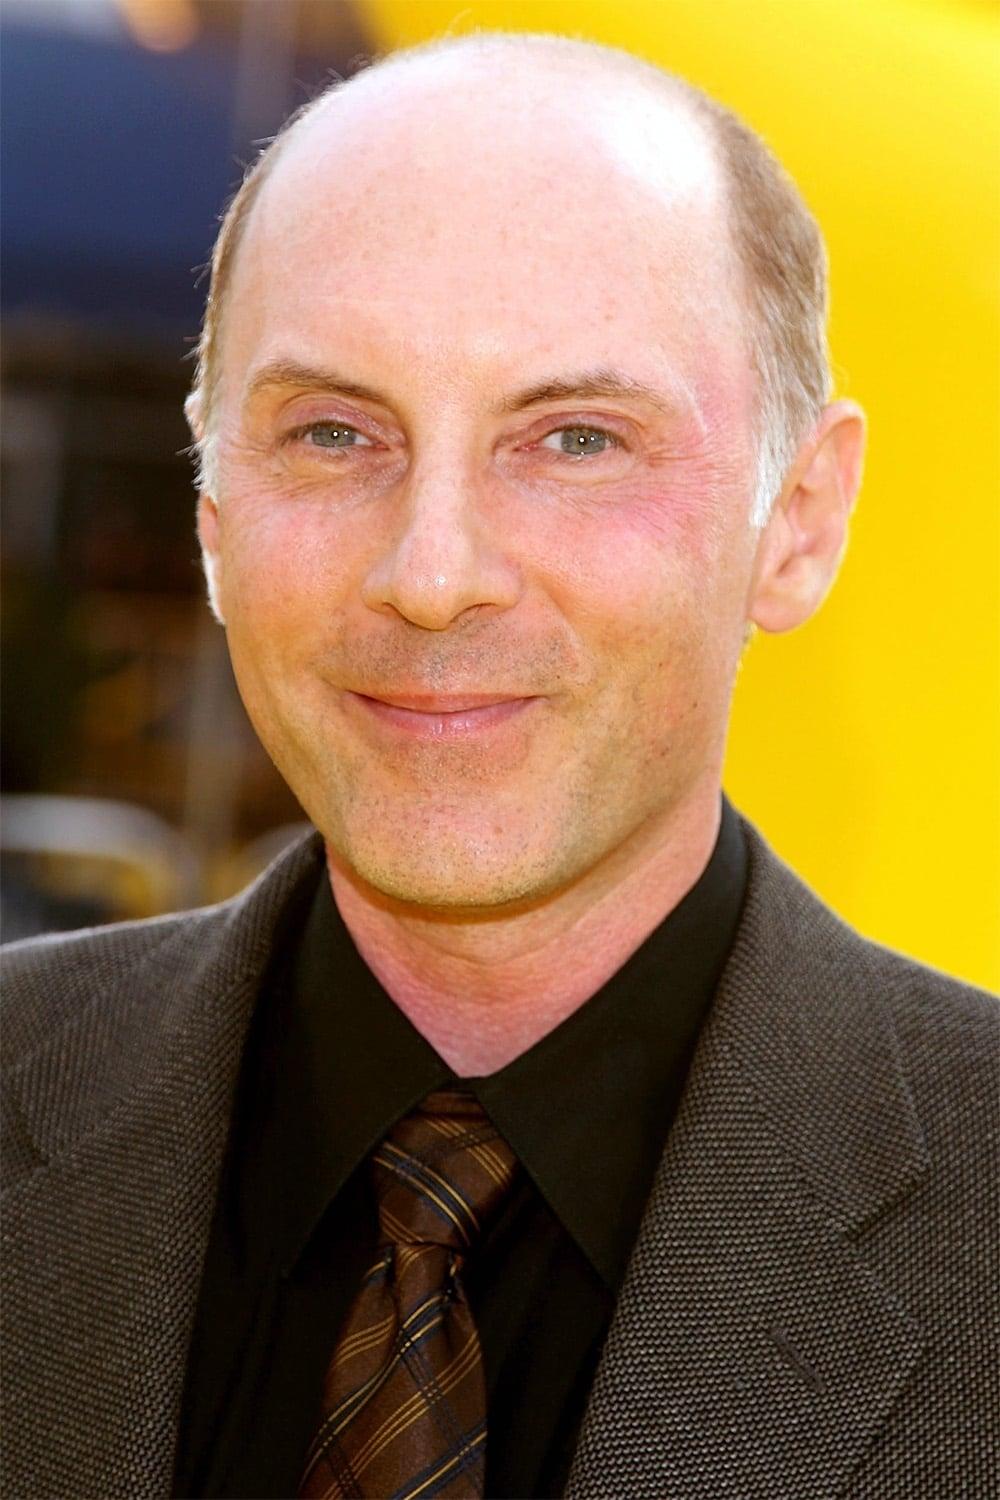 Dan Castellaneta | Homer Simpson / Itchy / Barney / Abe Simpson / Stage Manager / Krusty the Clown / Mayor Quimby / Mayor's Aide / Multi-Eyed Squirrel / Panicky Man / Sideshow Mel / Mr. Teeny / EPA Official / Kissing Cop / Bear / Boy on Phone / NSA Worker / Officer / Santa's Little Helper / Squeaky-Voiced Teen (voice)